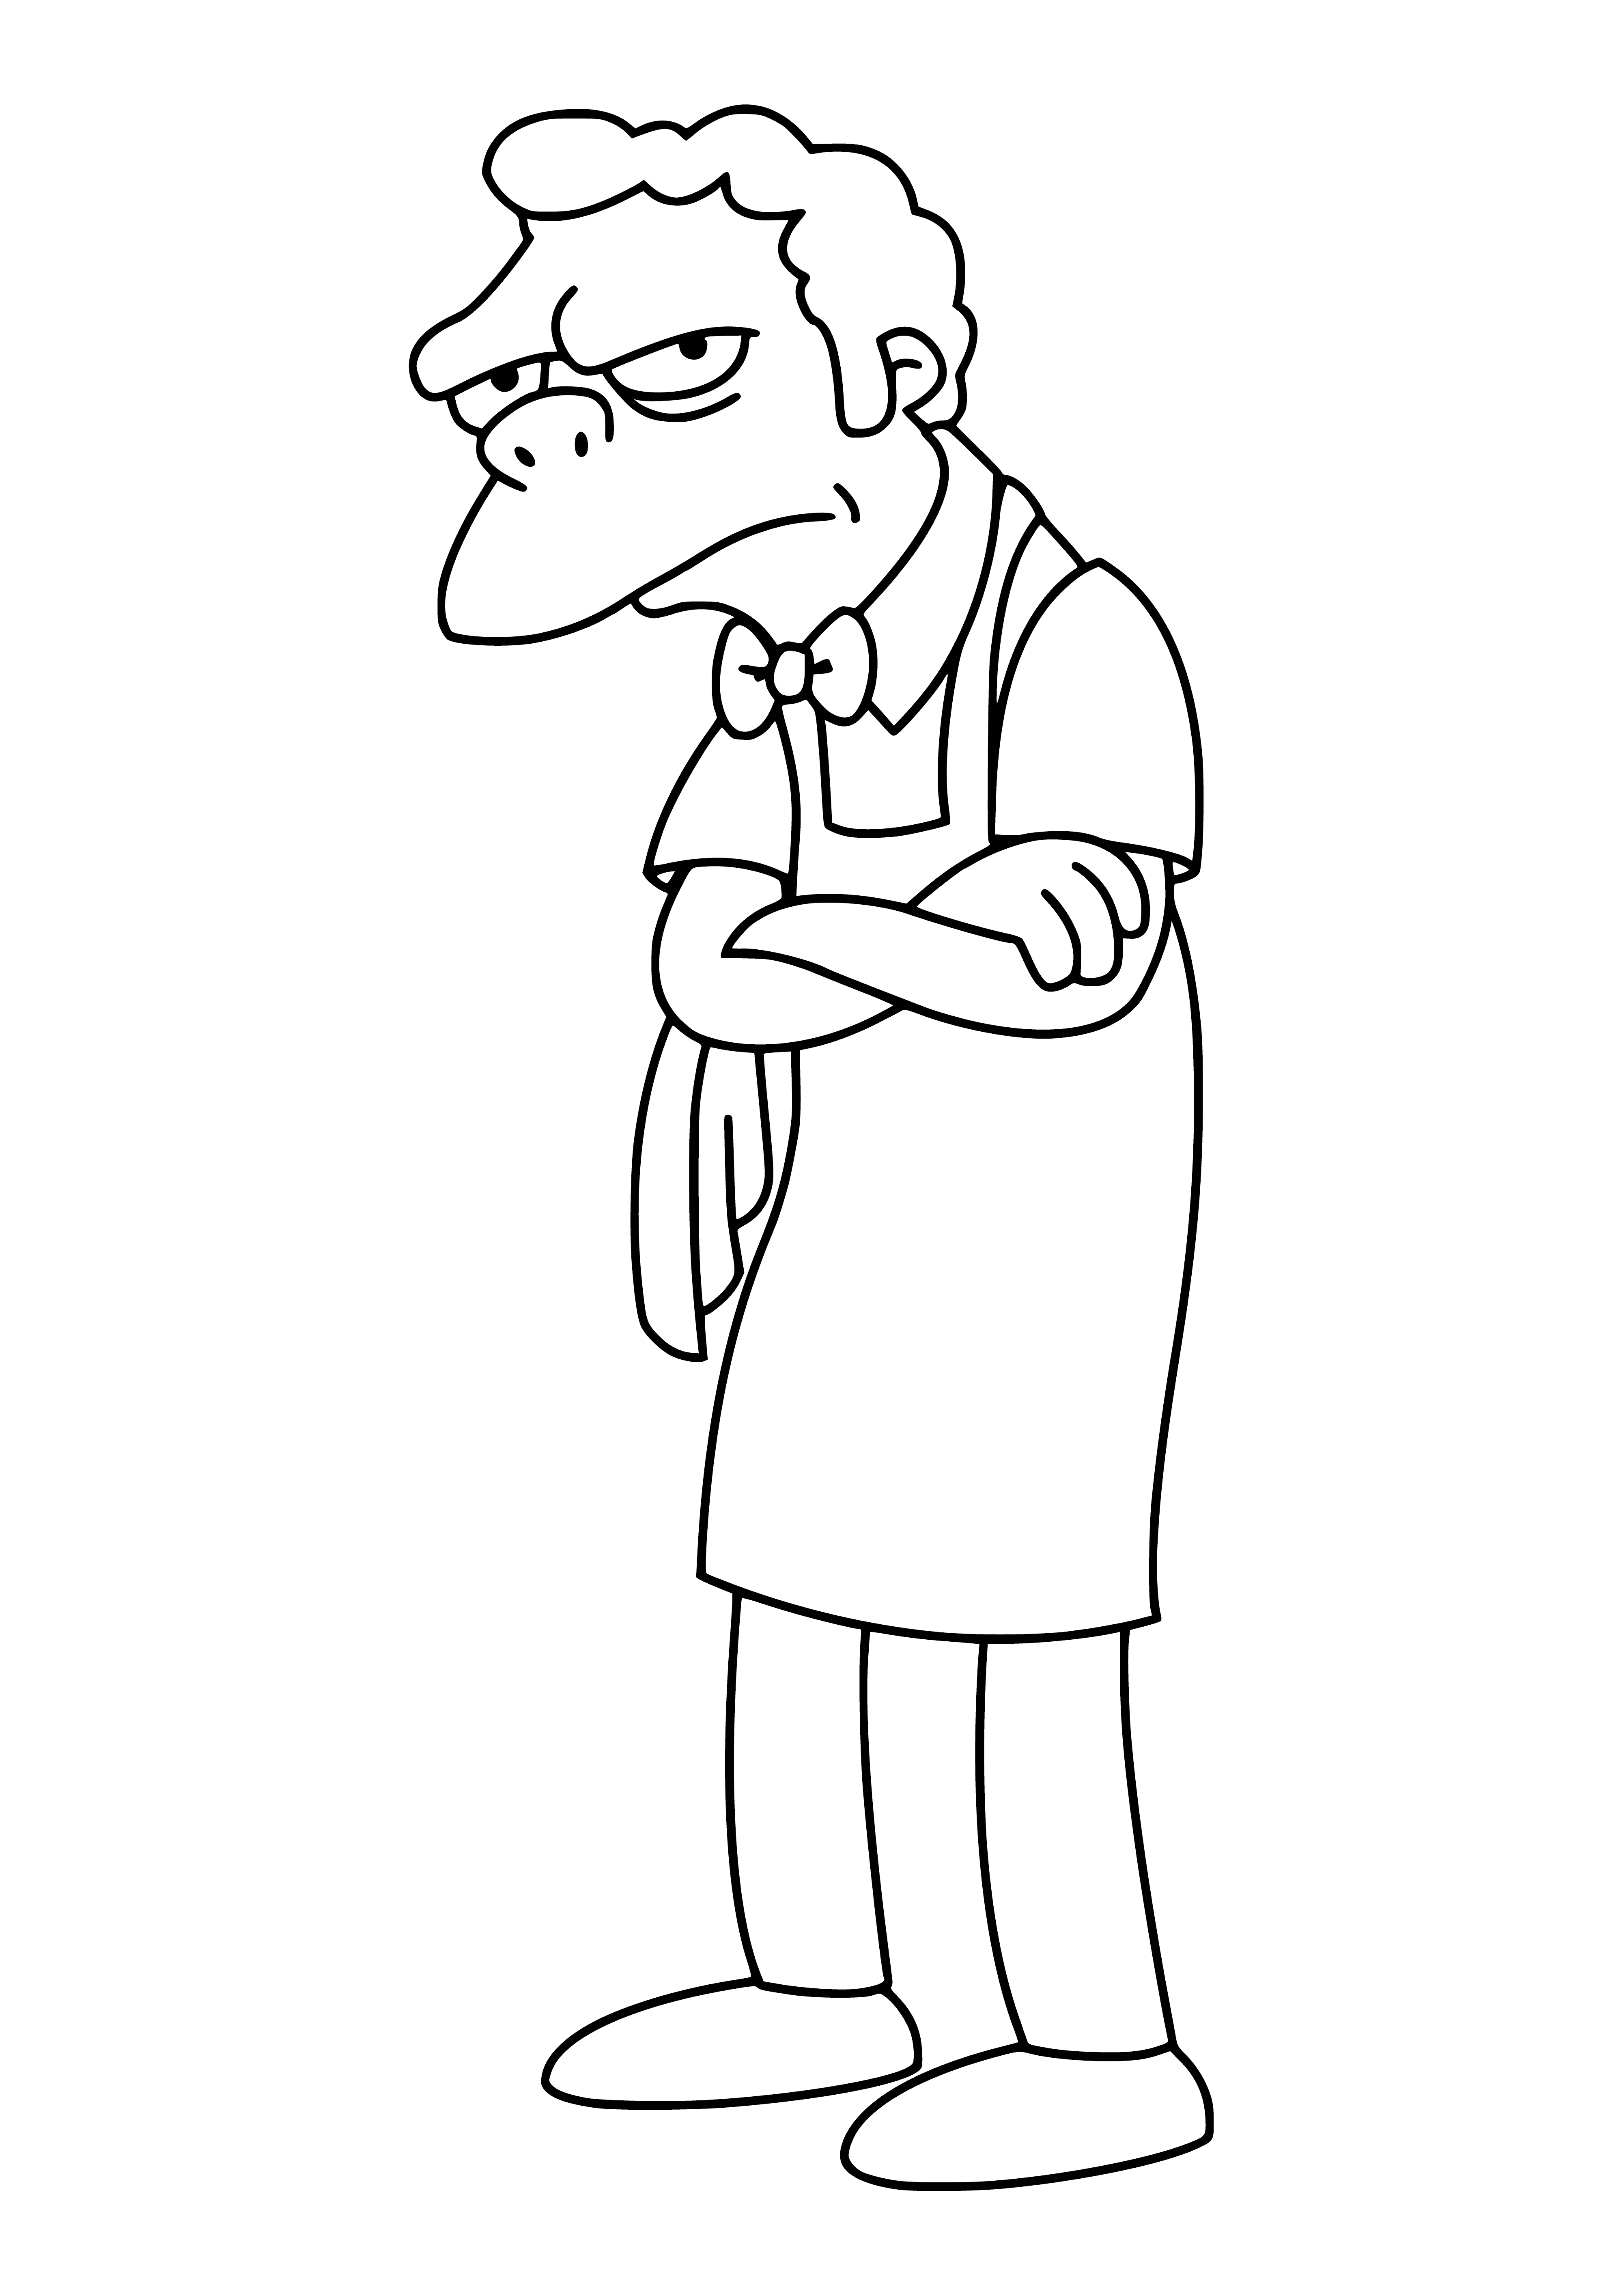 Bartender Mo. coloring page